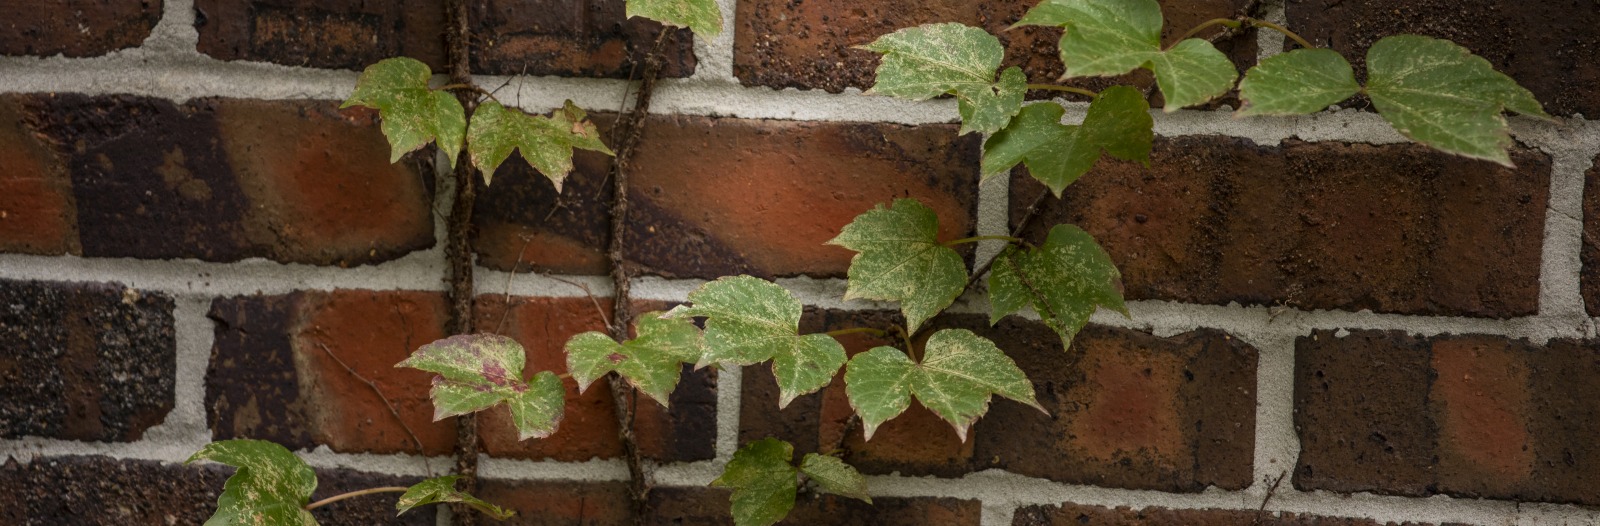 Green ivy growing on a brick wall